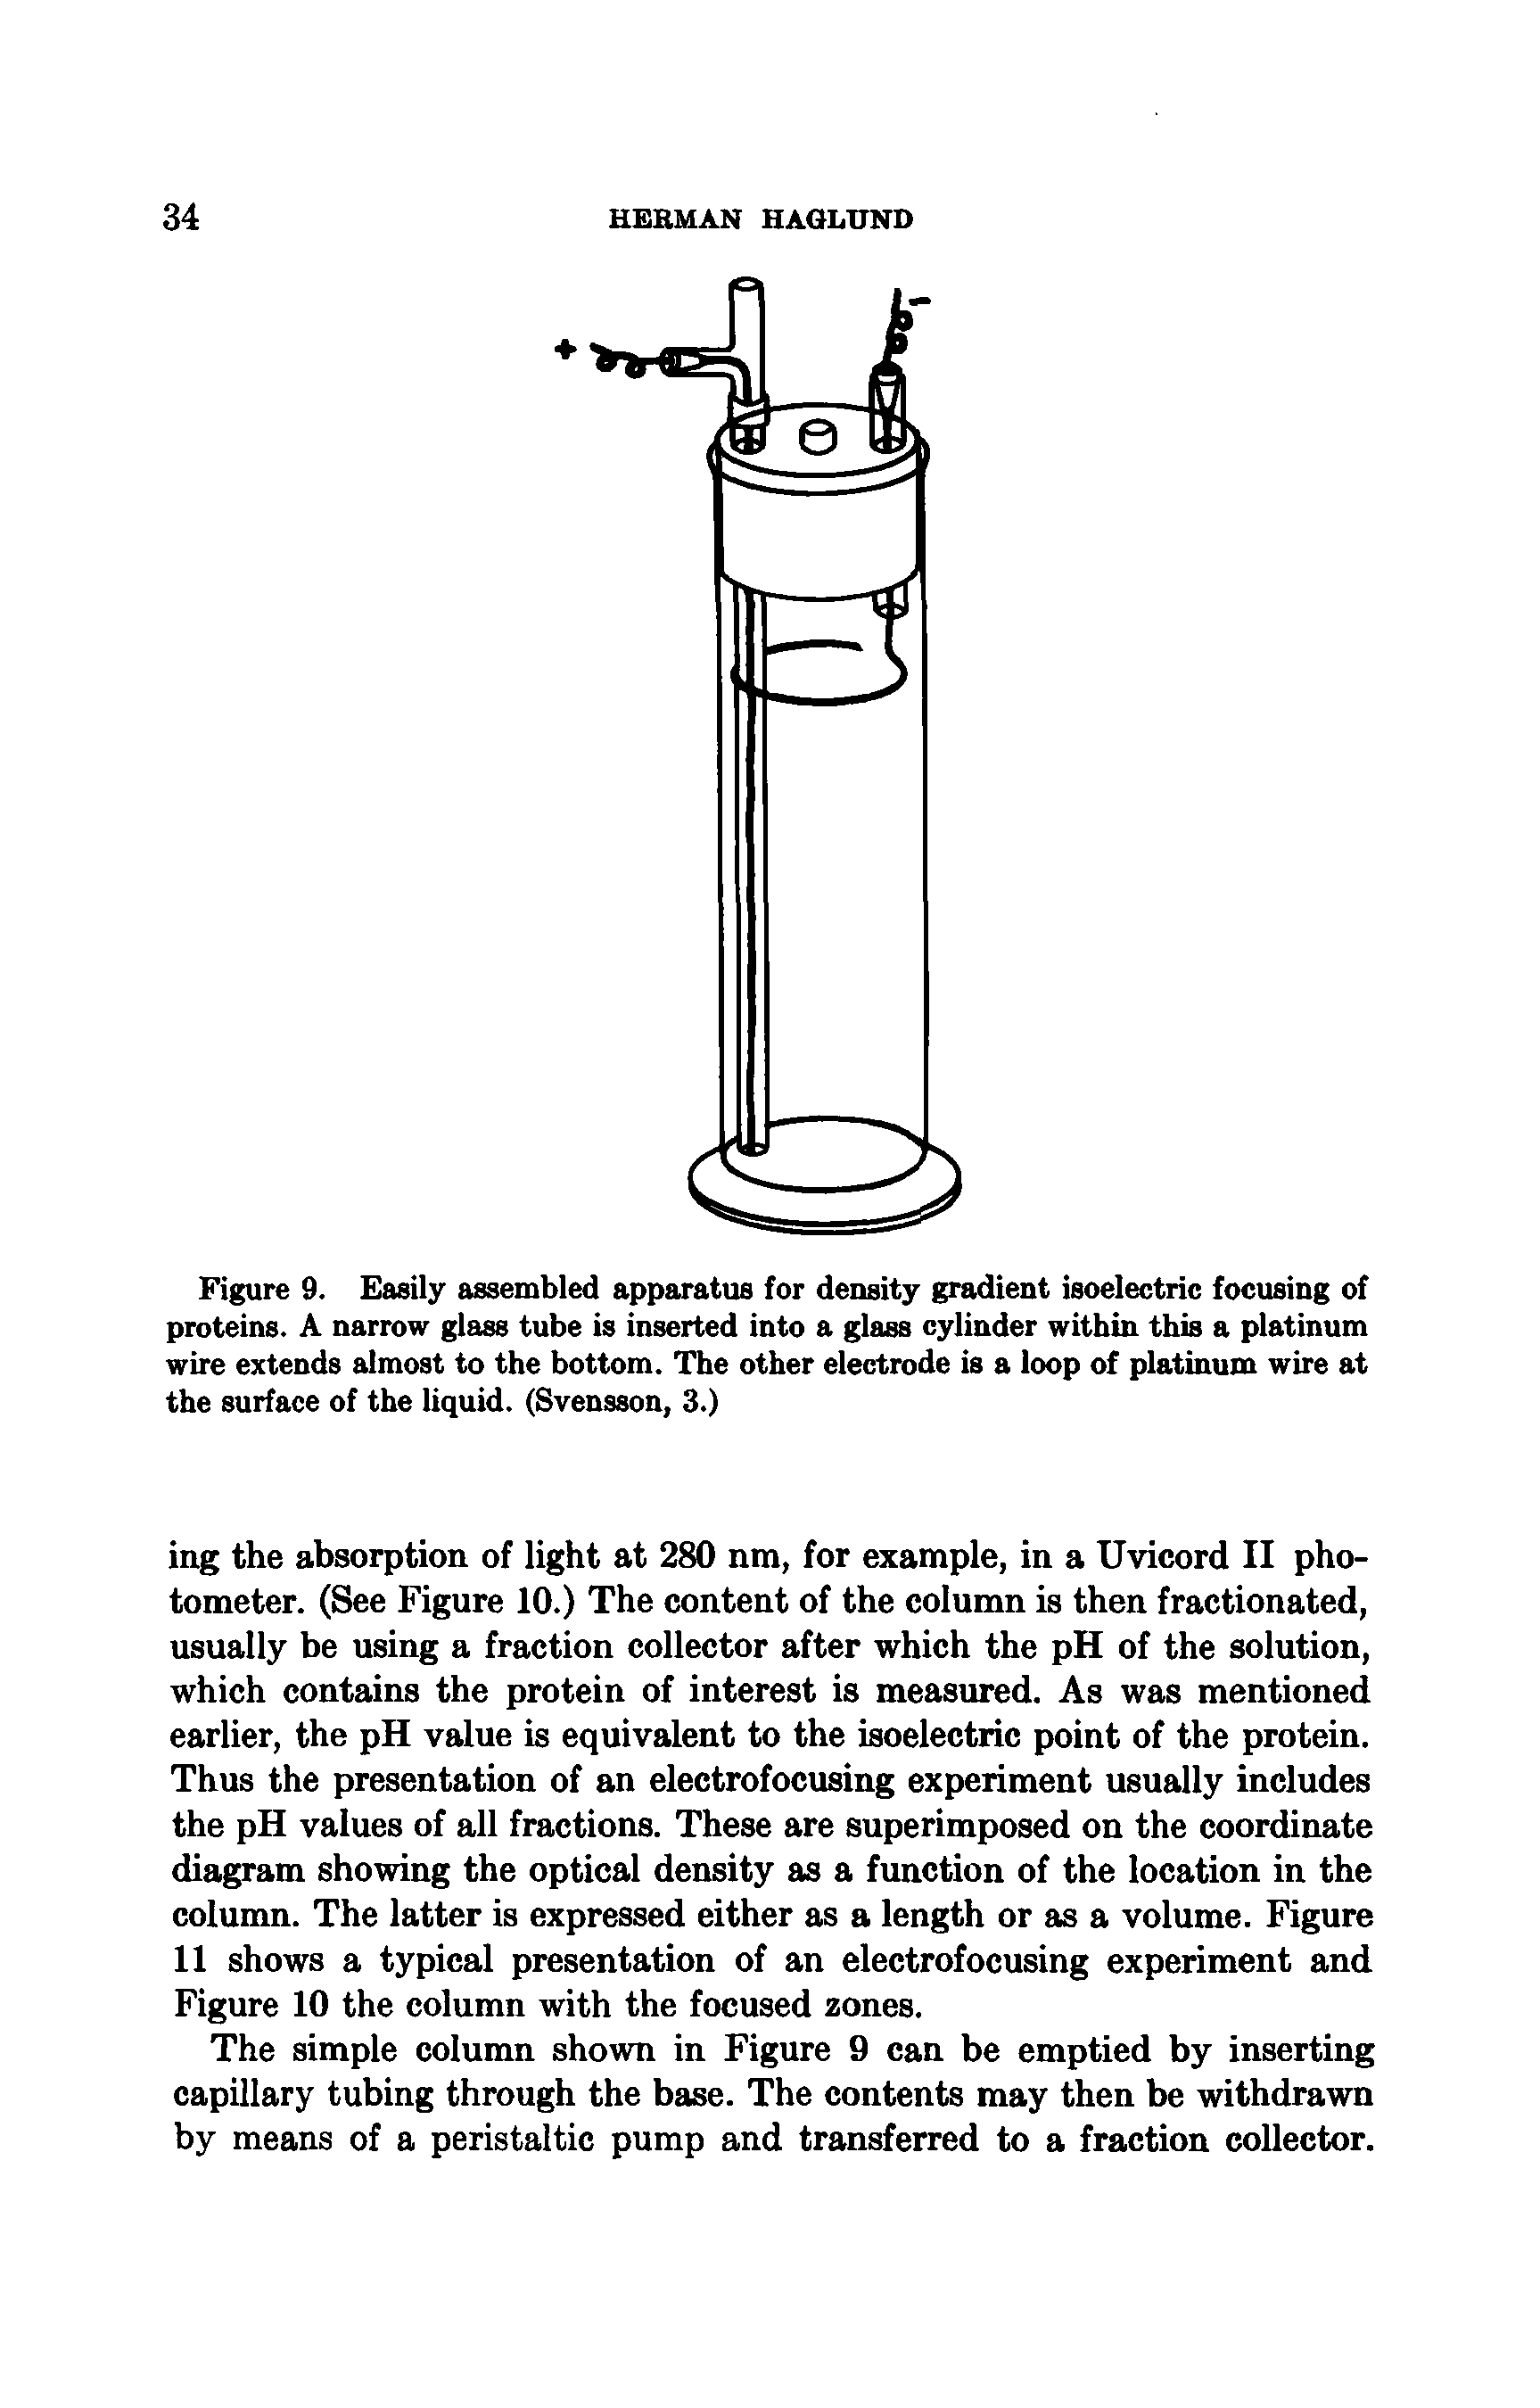 Figure 9. Easily assembled apparatus for density gradient isoelectric focusing of proteins. A narrow glass tube is inserted into a glass cylinder within this a platinum wire extends almost to the bottom. The other electrode is a loop of platinum wire at the surface of the liquid. (Svensson, 3.)...